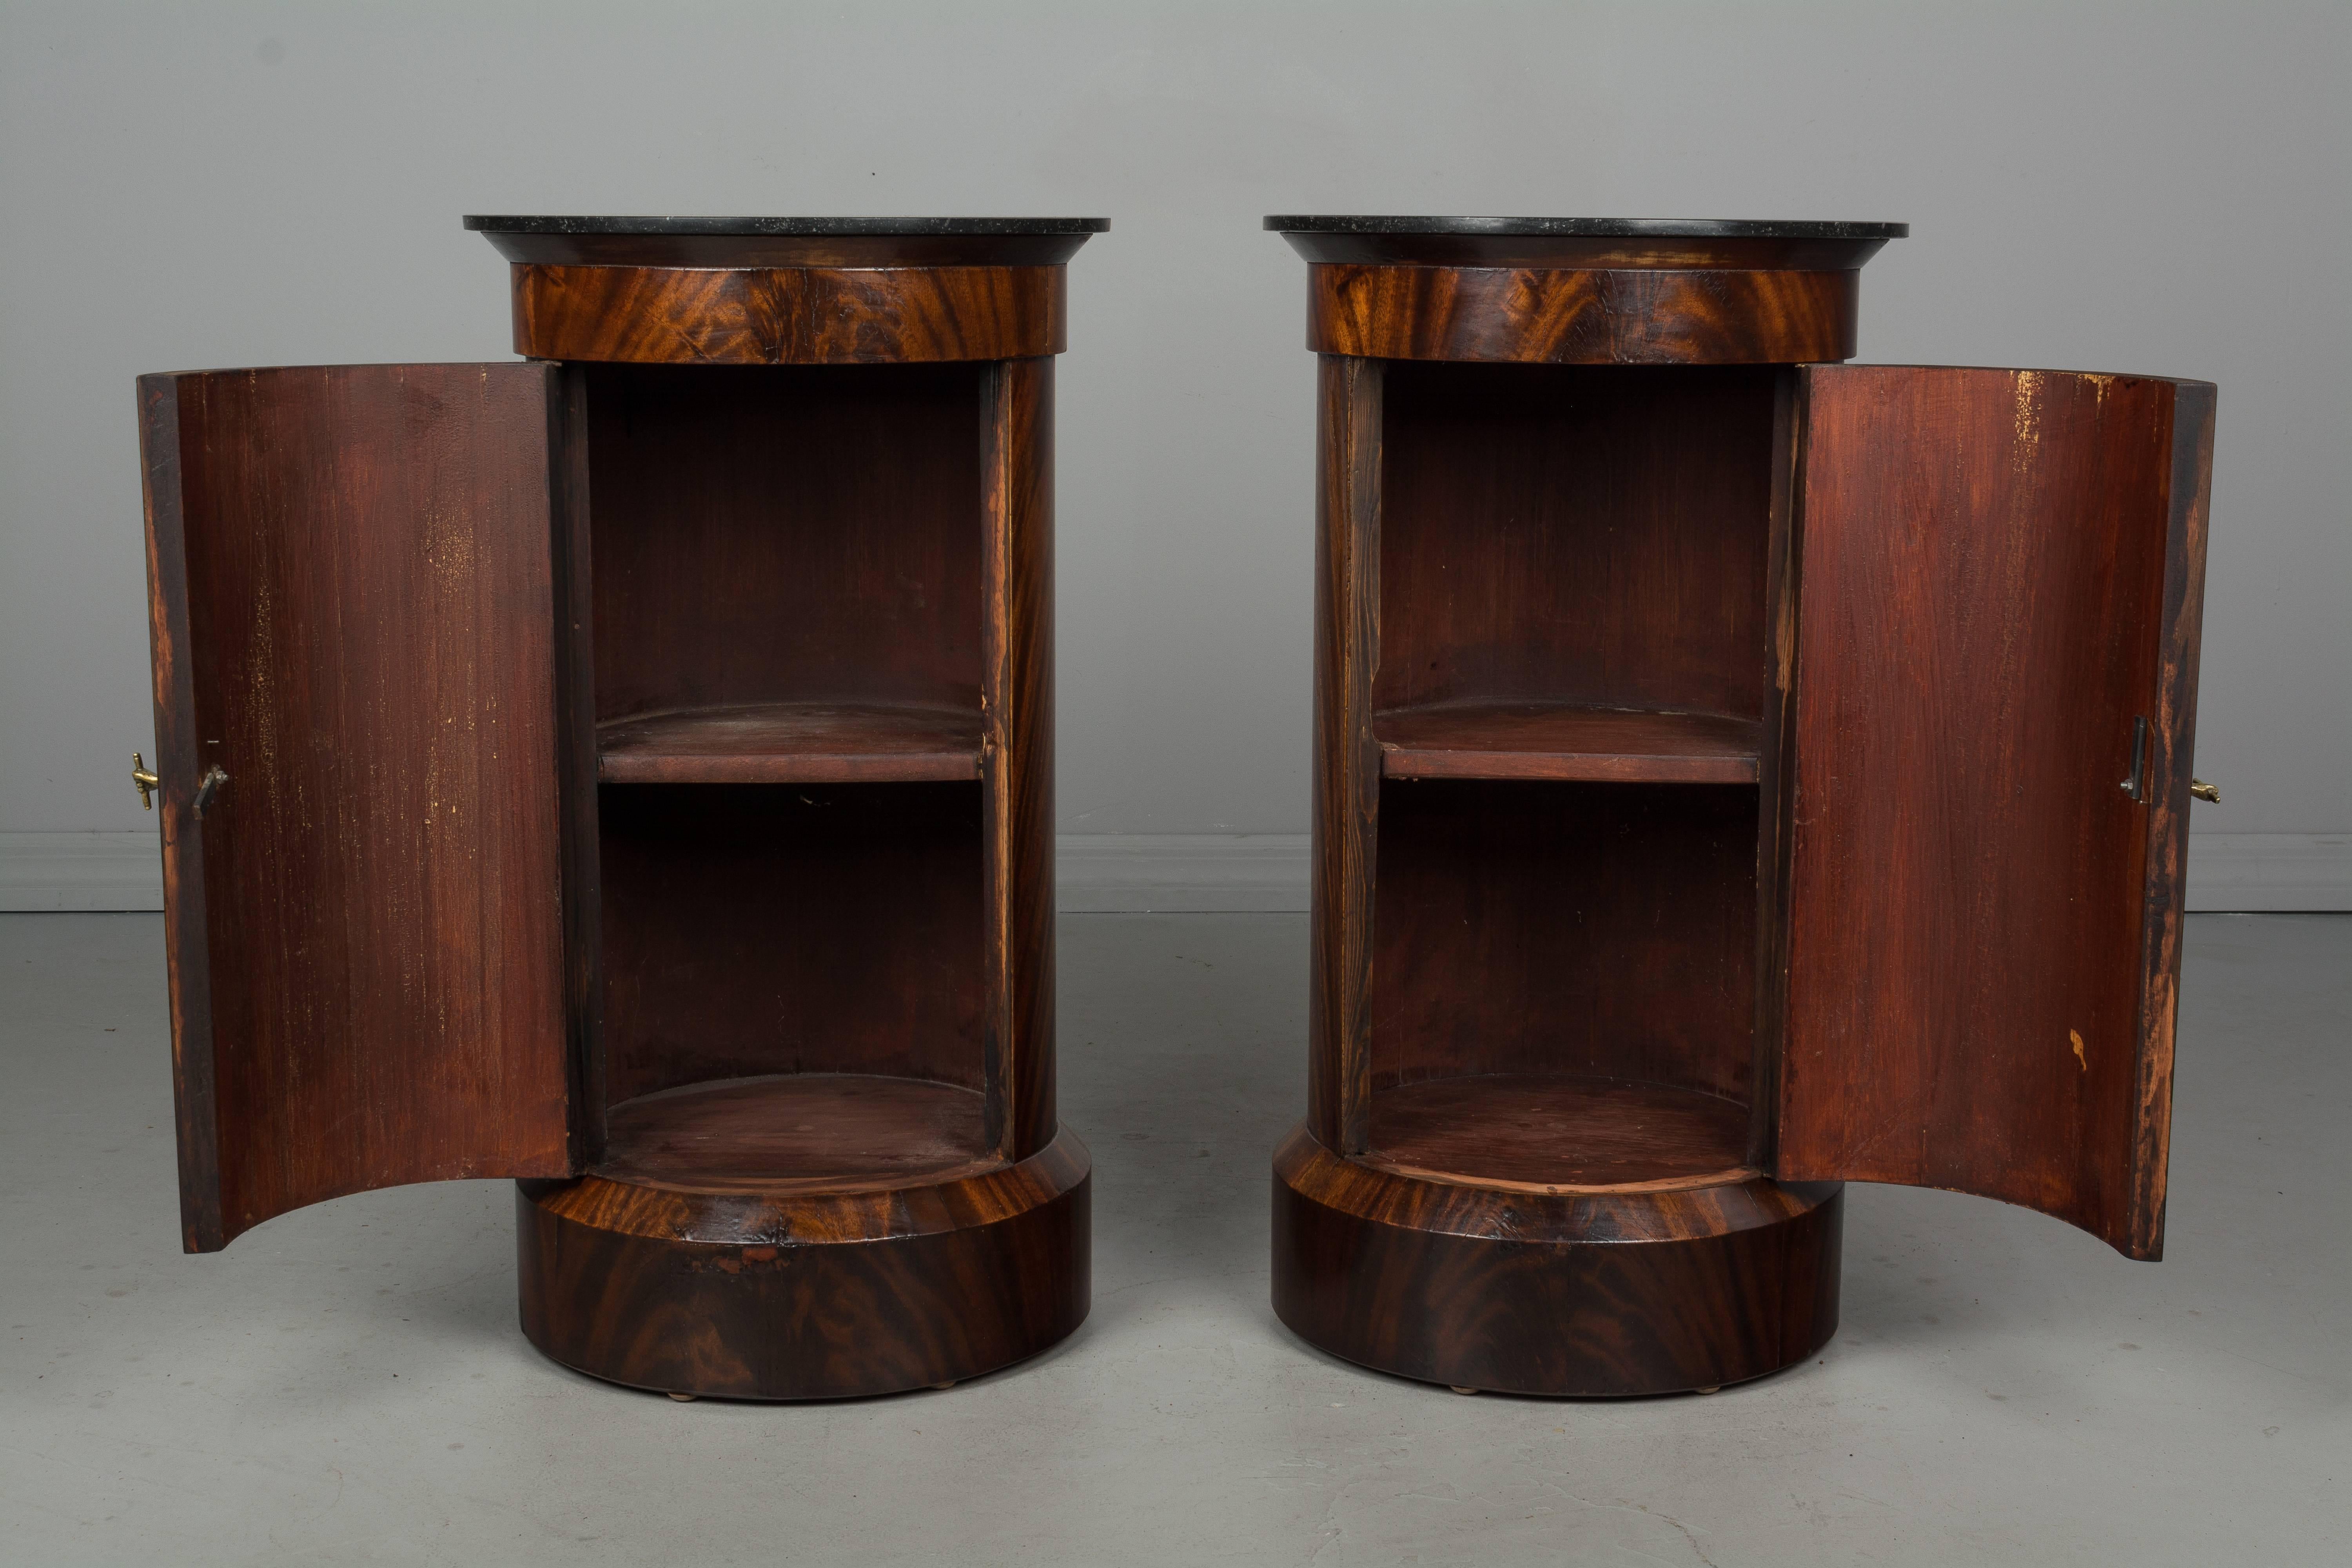 A pair of 19th century French Louis Philippe style mahogany pedestal side tables of cylindrical shape with dark grey marble tops. Single door with small brass hand knob opens to reveal a single shelf. Raised on a plinth base. Beautiful flame